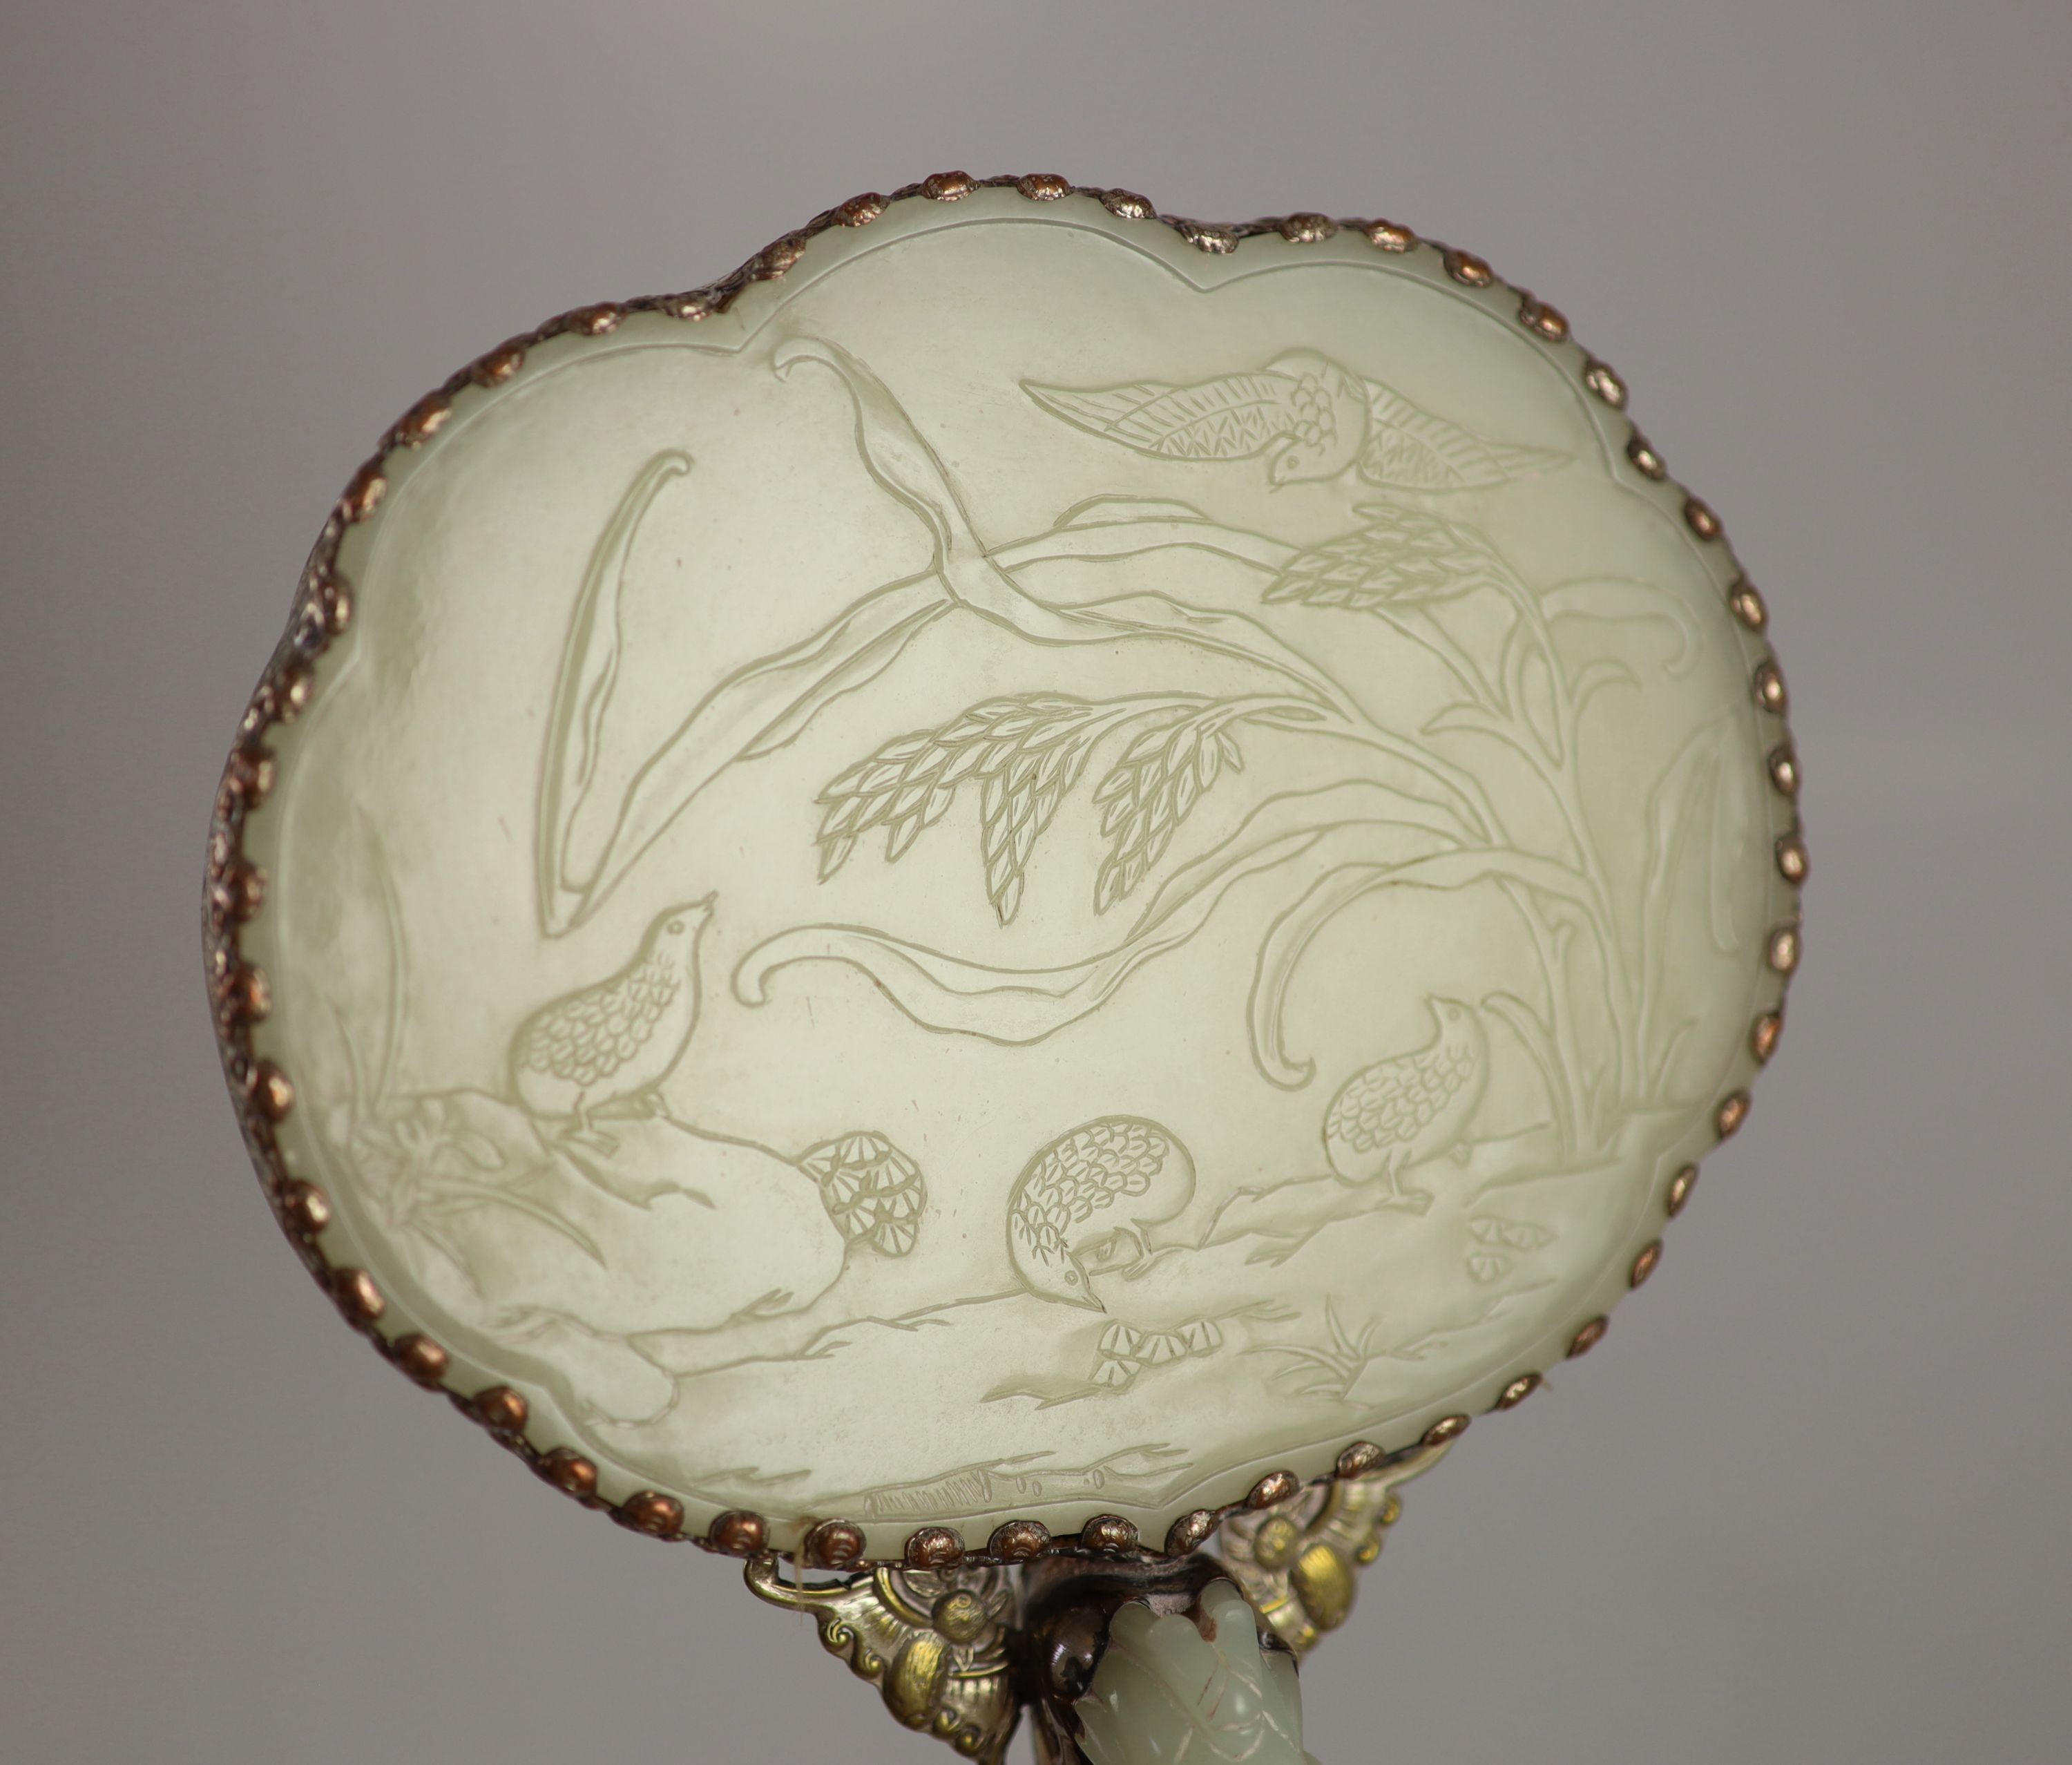 A Chinese pale celadon jade mounted hand mirror, the jade 18th/19th century, 24.2cm long, plaque 13.2 x 11.5cm, belt hook handle 12.3cm